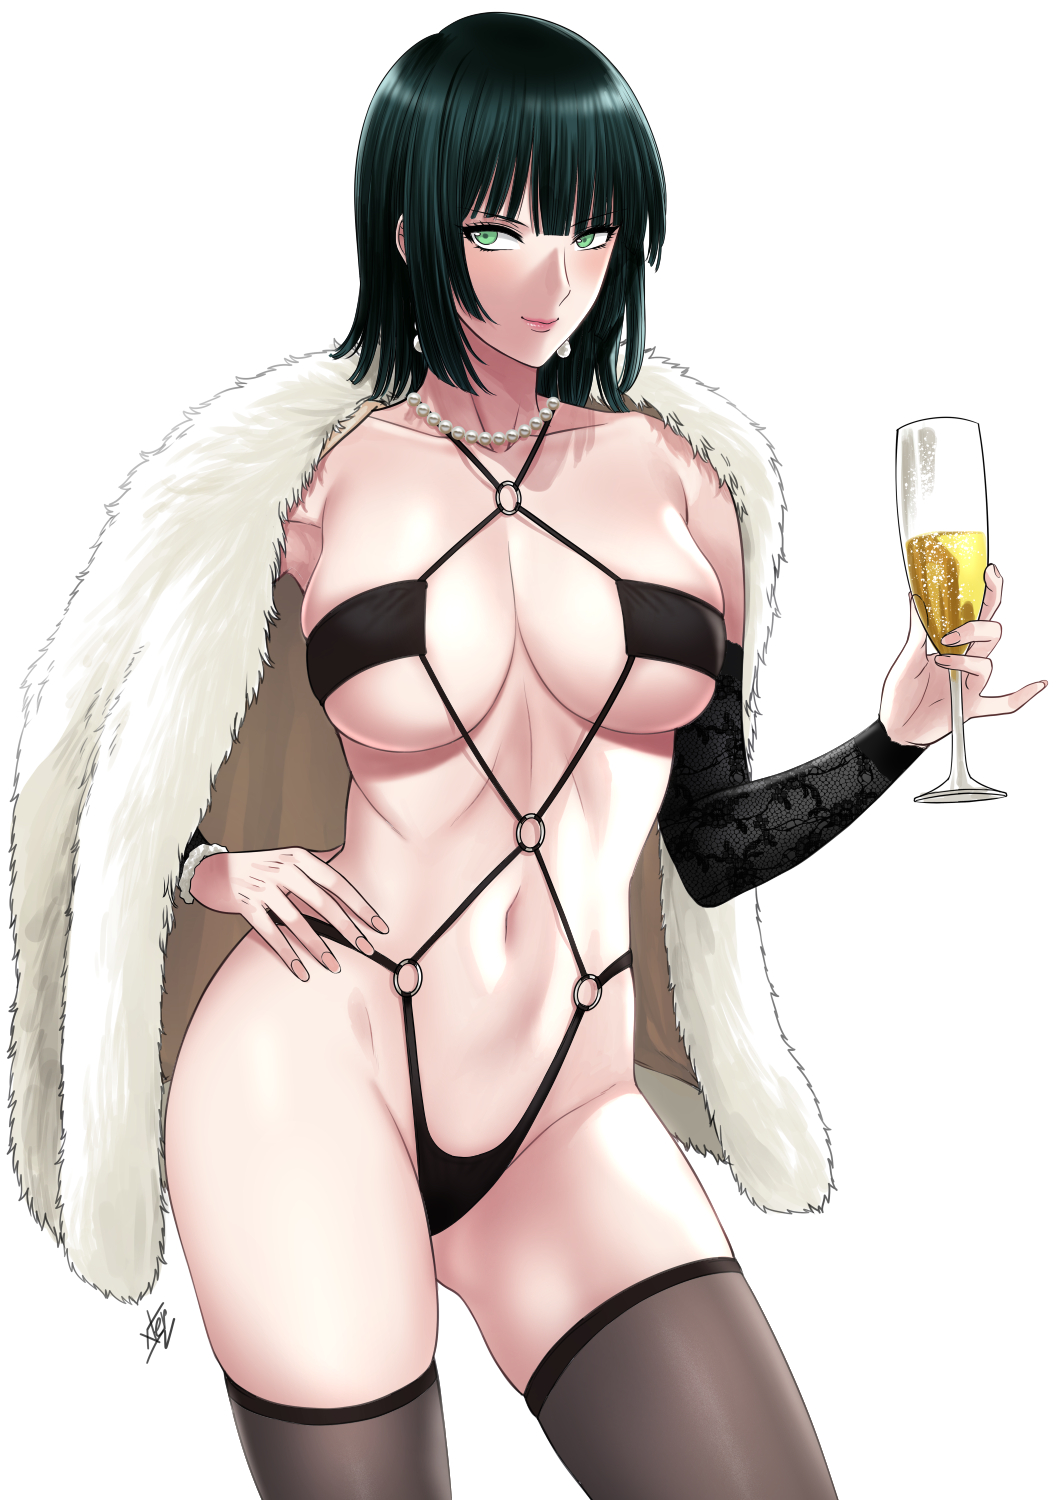 Anime 1061x1500 Xtermination One-Punch Man Fubuki portrait display anime girls belly belly button wine glass champagne stockings looking at viewer big boobs pearls lingerie minimalism white background thighs smiling